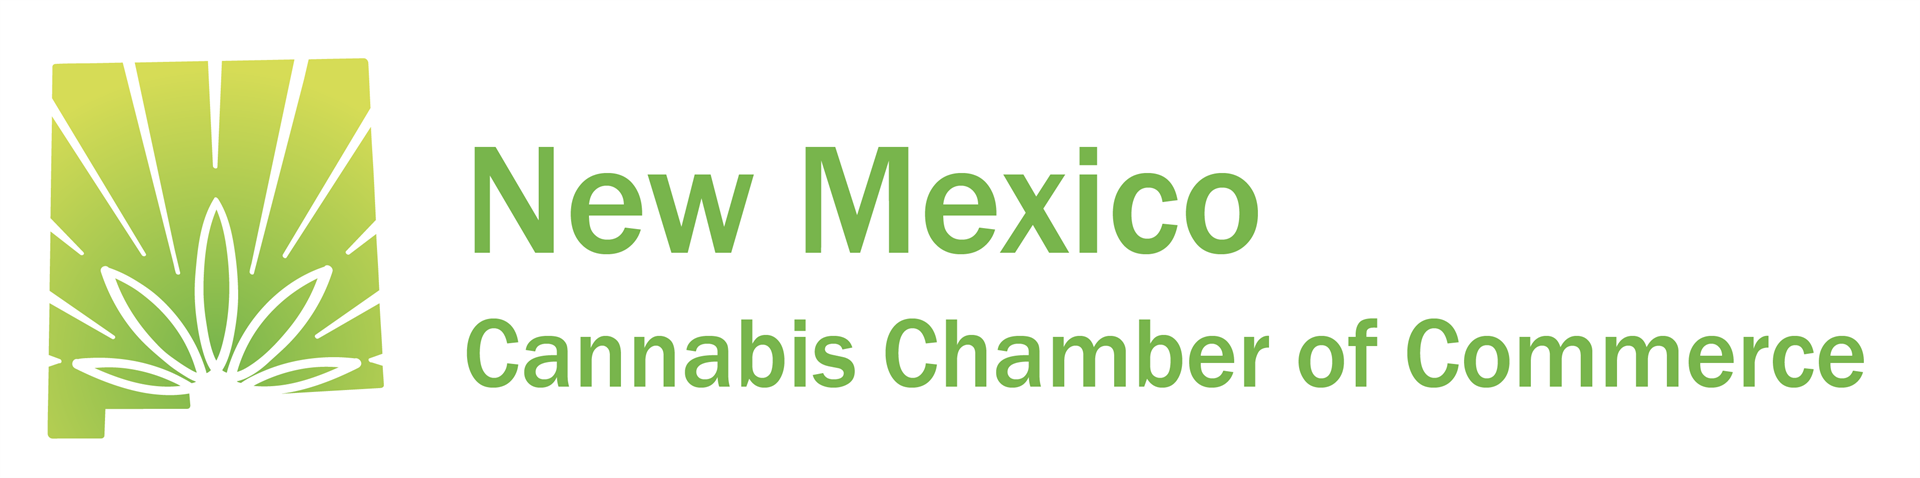 Herring Bank Cannabis Banking New Mexico Cannabis Chamber of Commerce